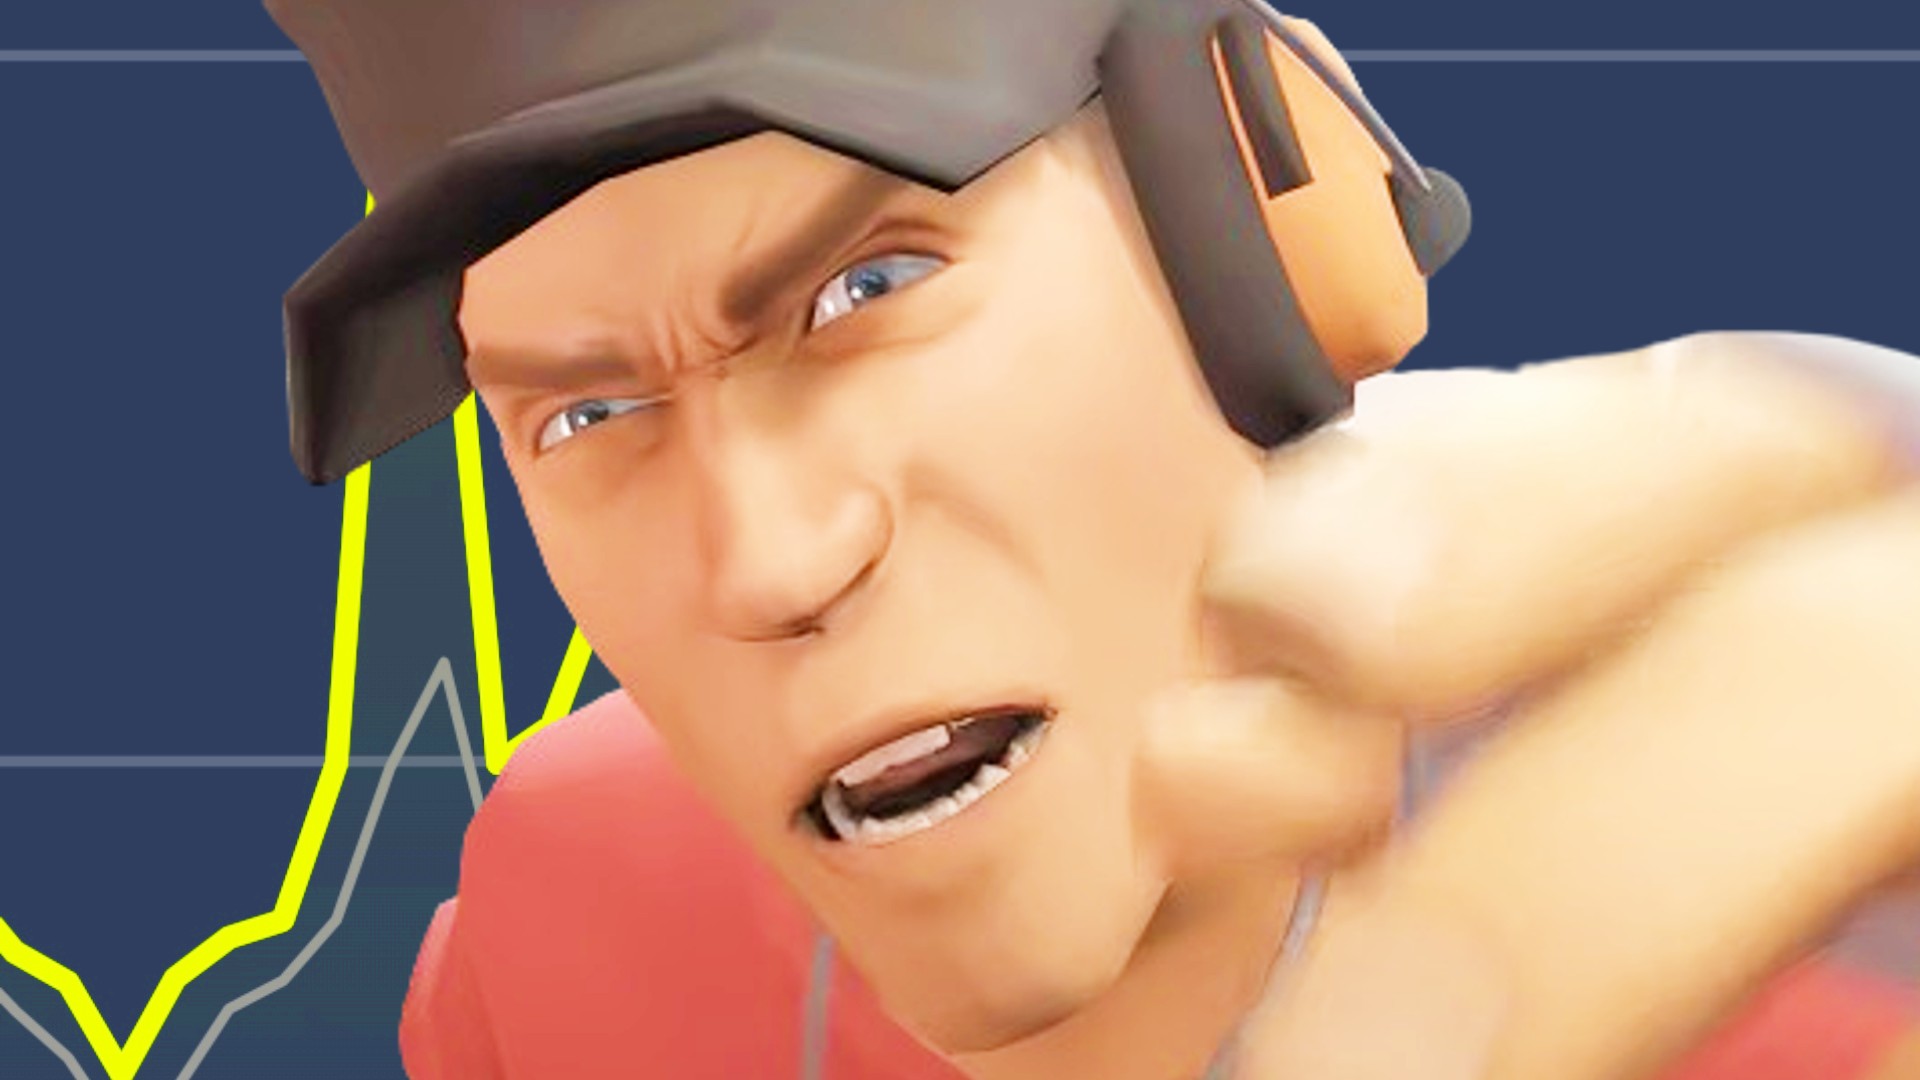 Team Fortress 2 is going wild on Steam after big Valve update